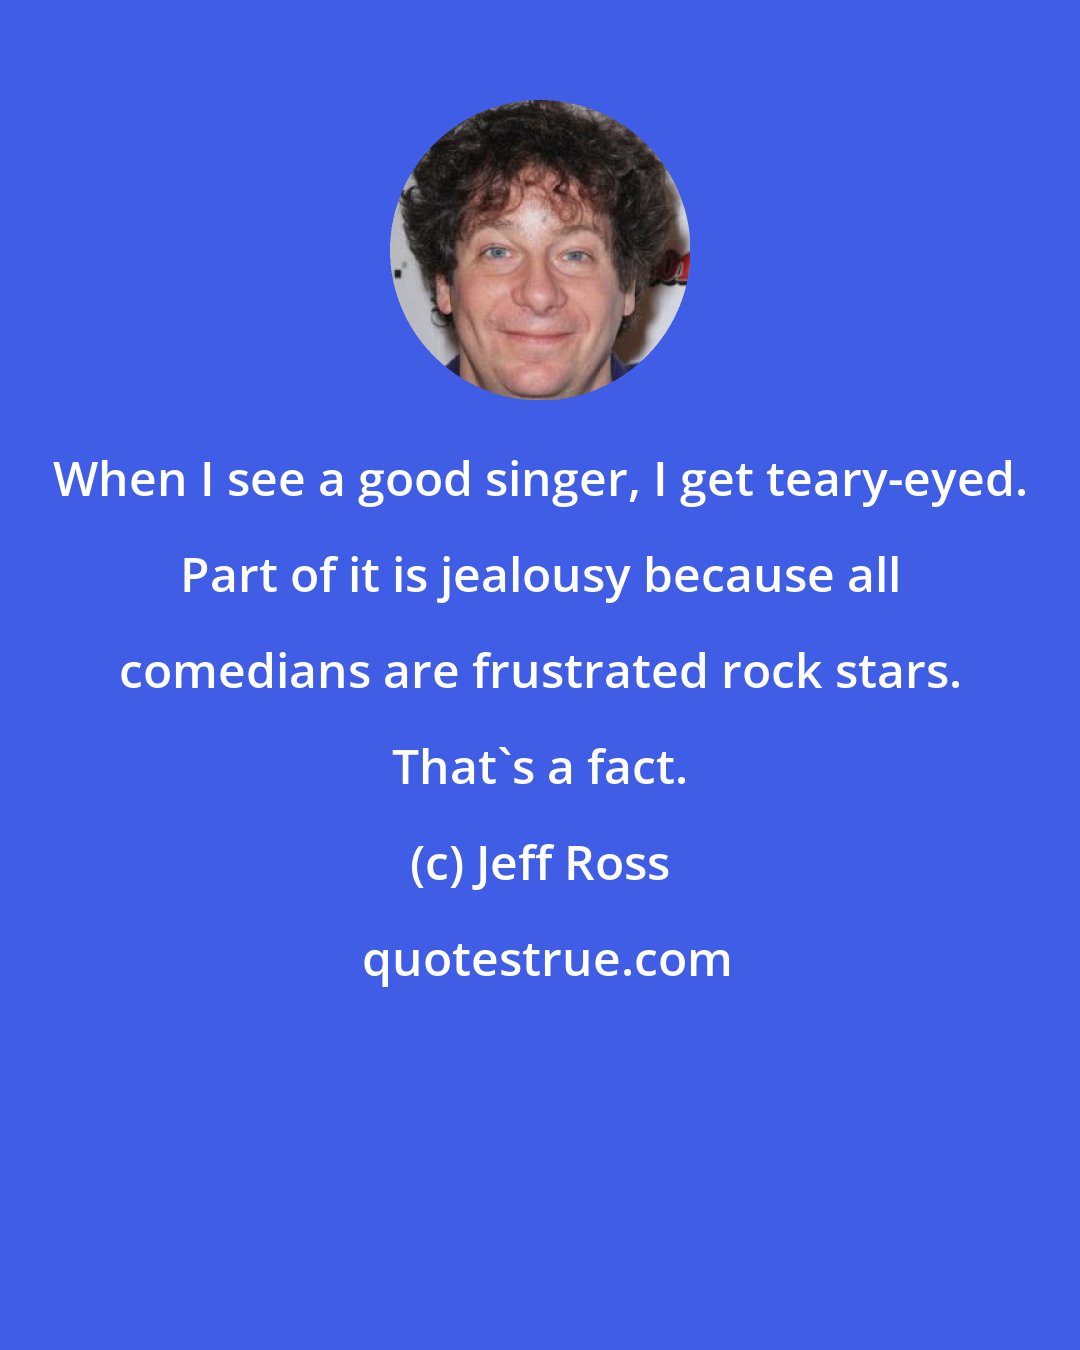 Jeff Ross: When I see a good singer, I get teary-eyed. Part of it is jealousy because all comedians are frustrated rock stars. That's a fact.